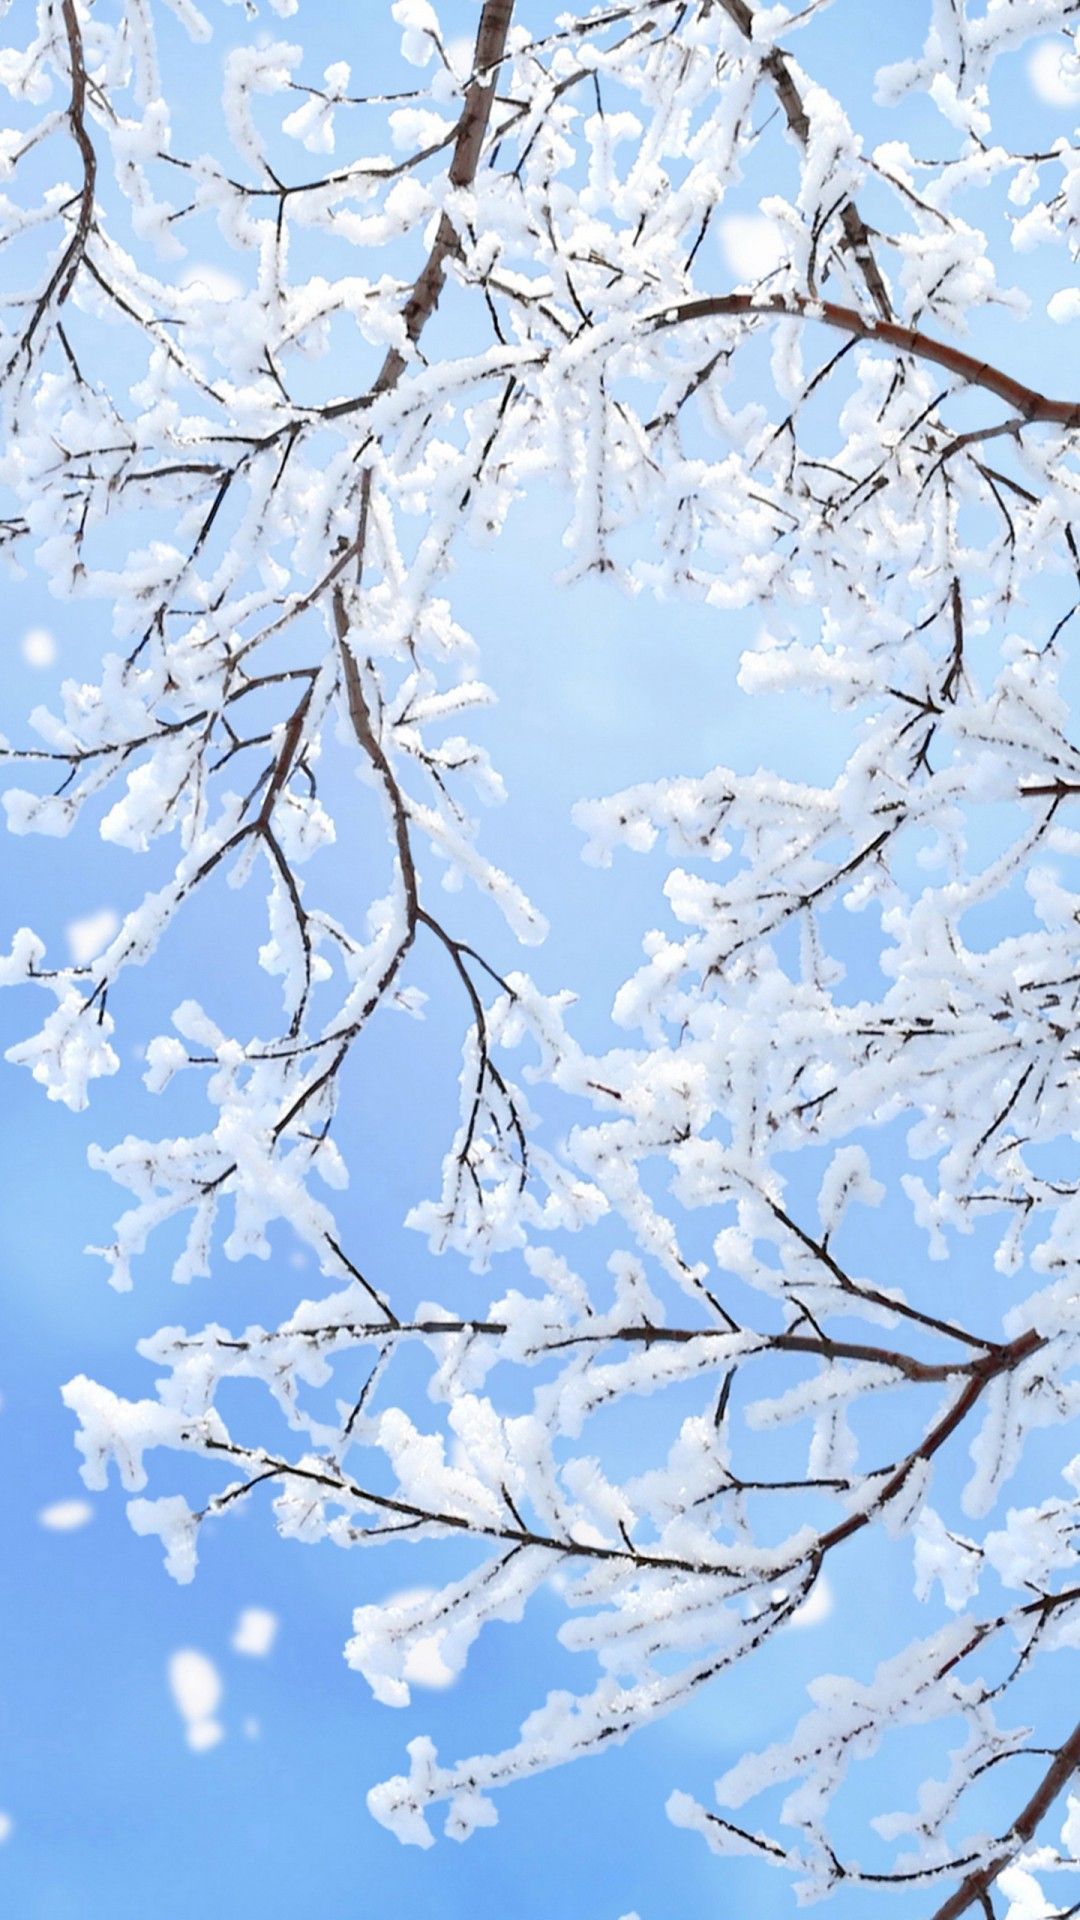 A snowy tree branch against a blue sky - Snowflake